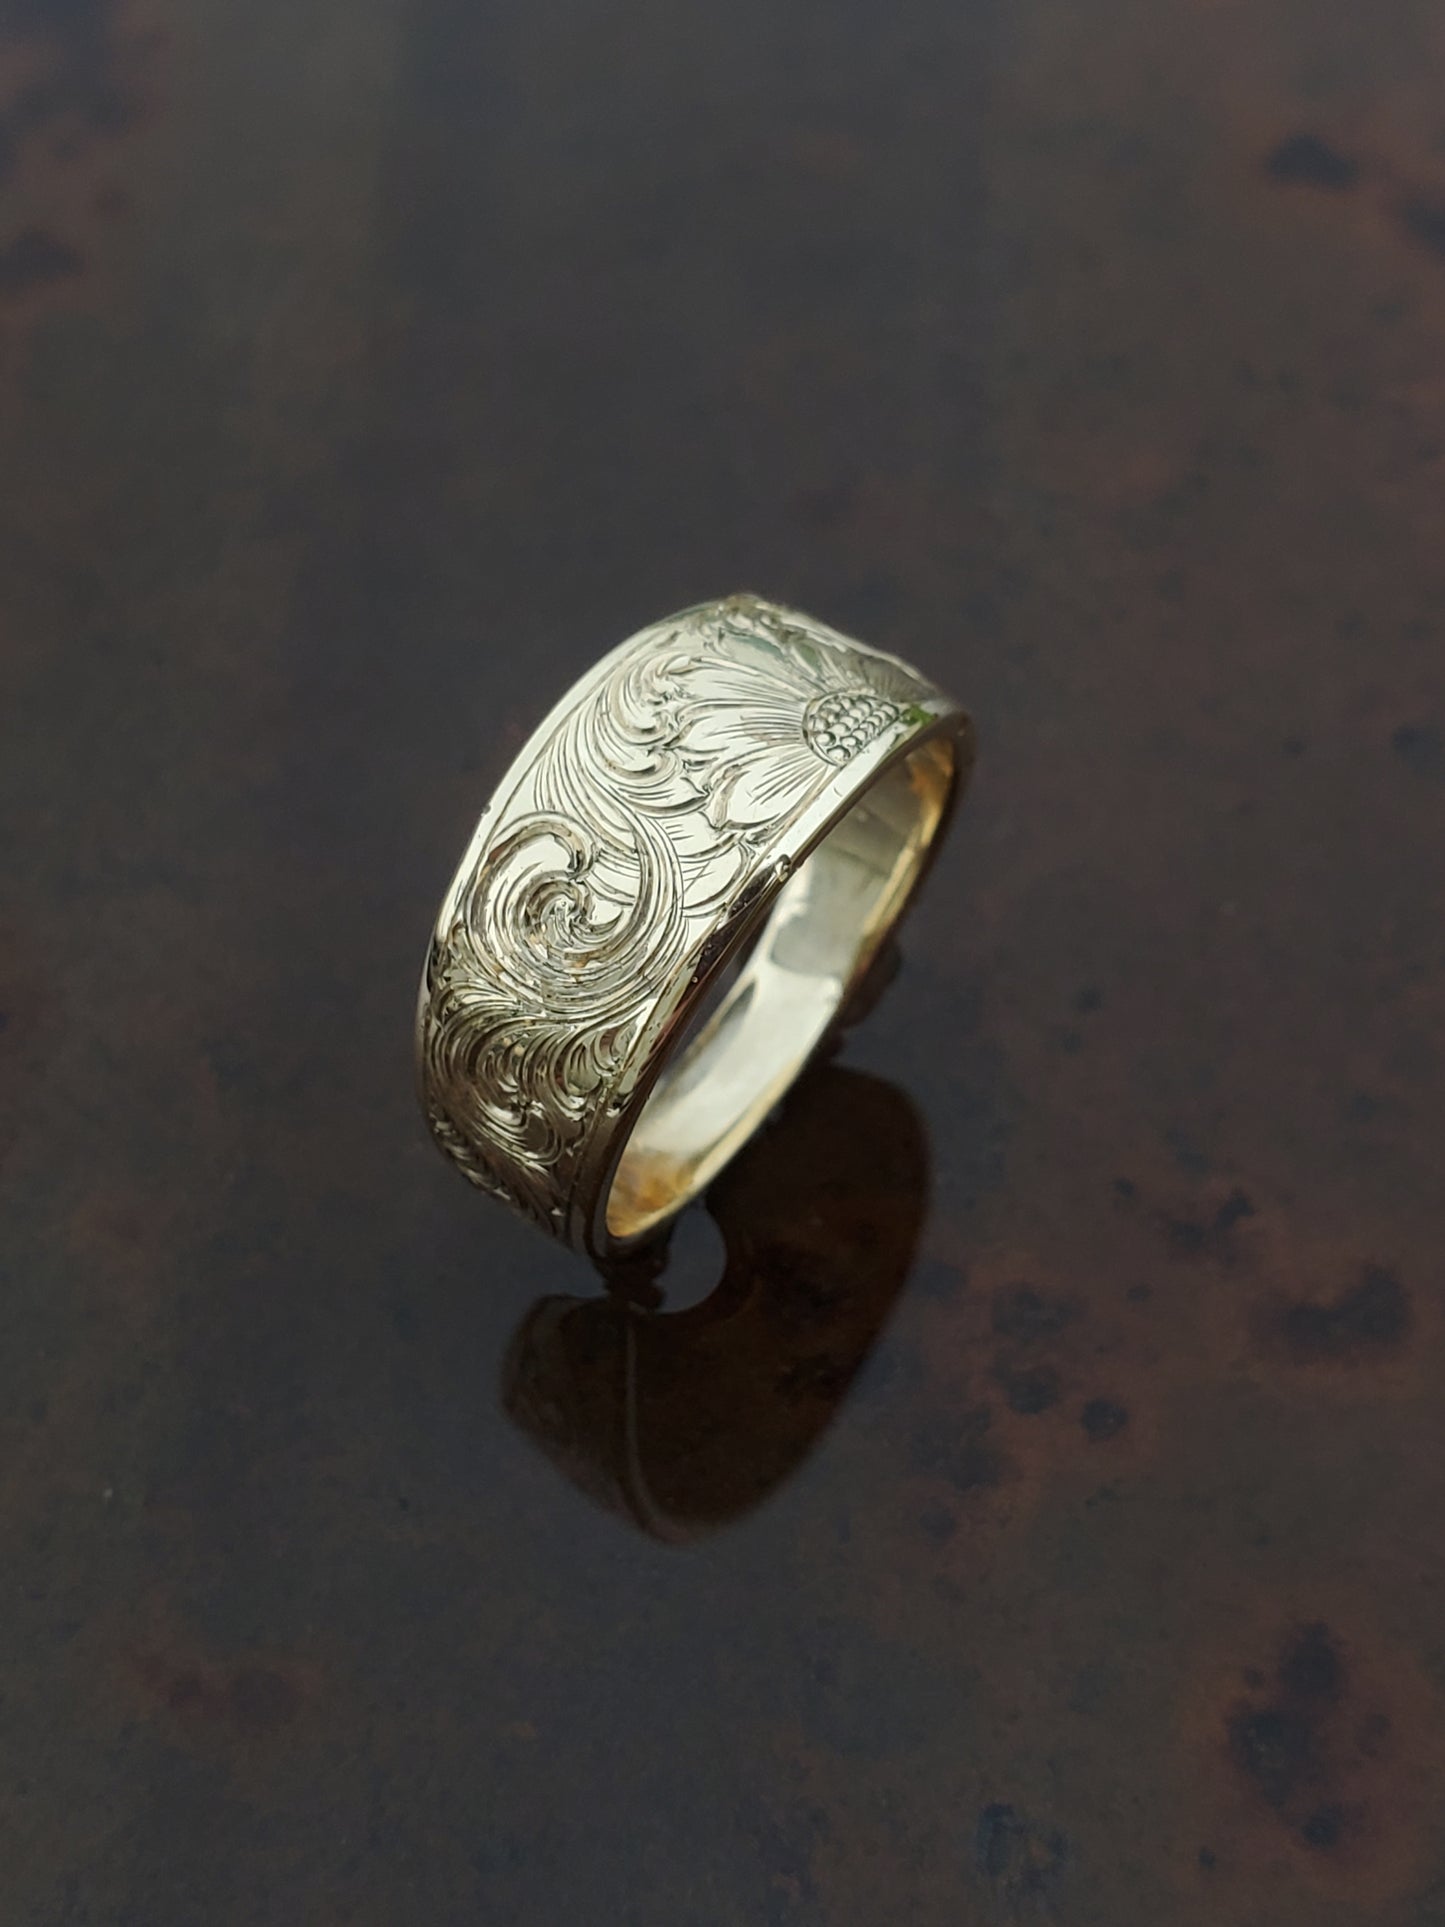 The Sunny: Sunflower Hand-Engraved 10K yellow gold Tapered floral hand-engraved ring, women's western jewelry, Cowgirl Sunflower Ring, Western Women's Band